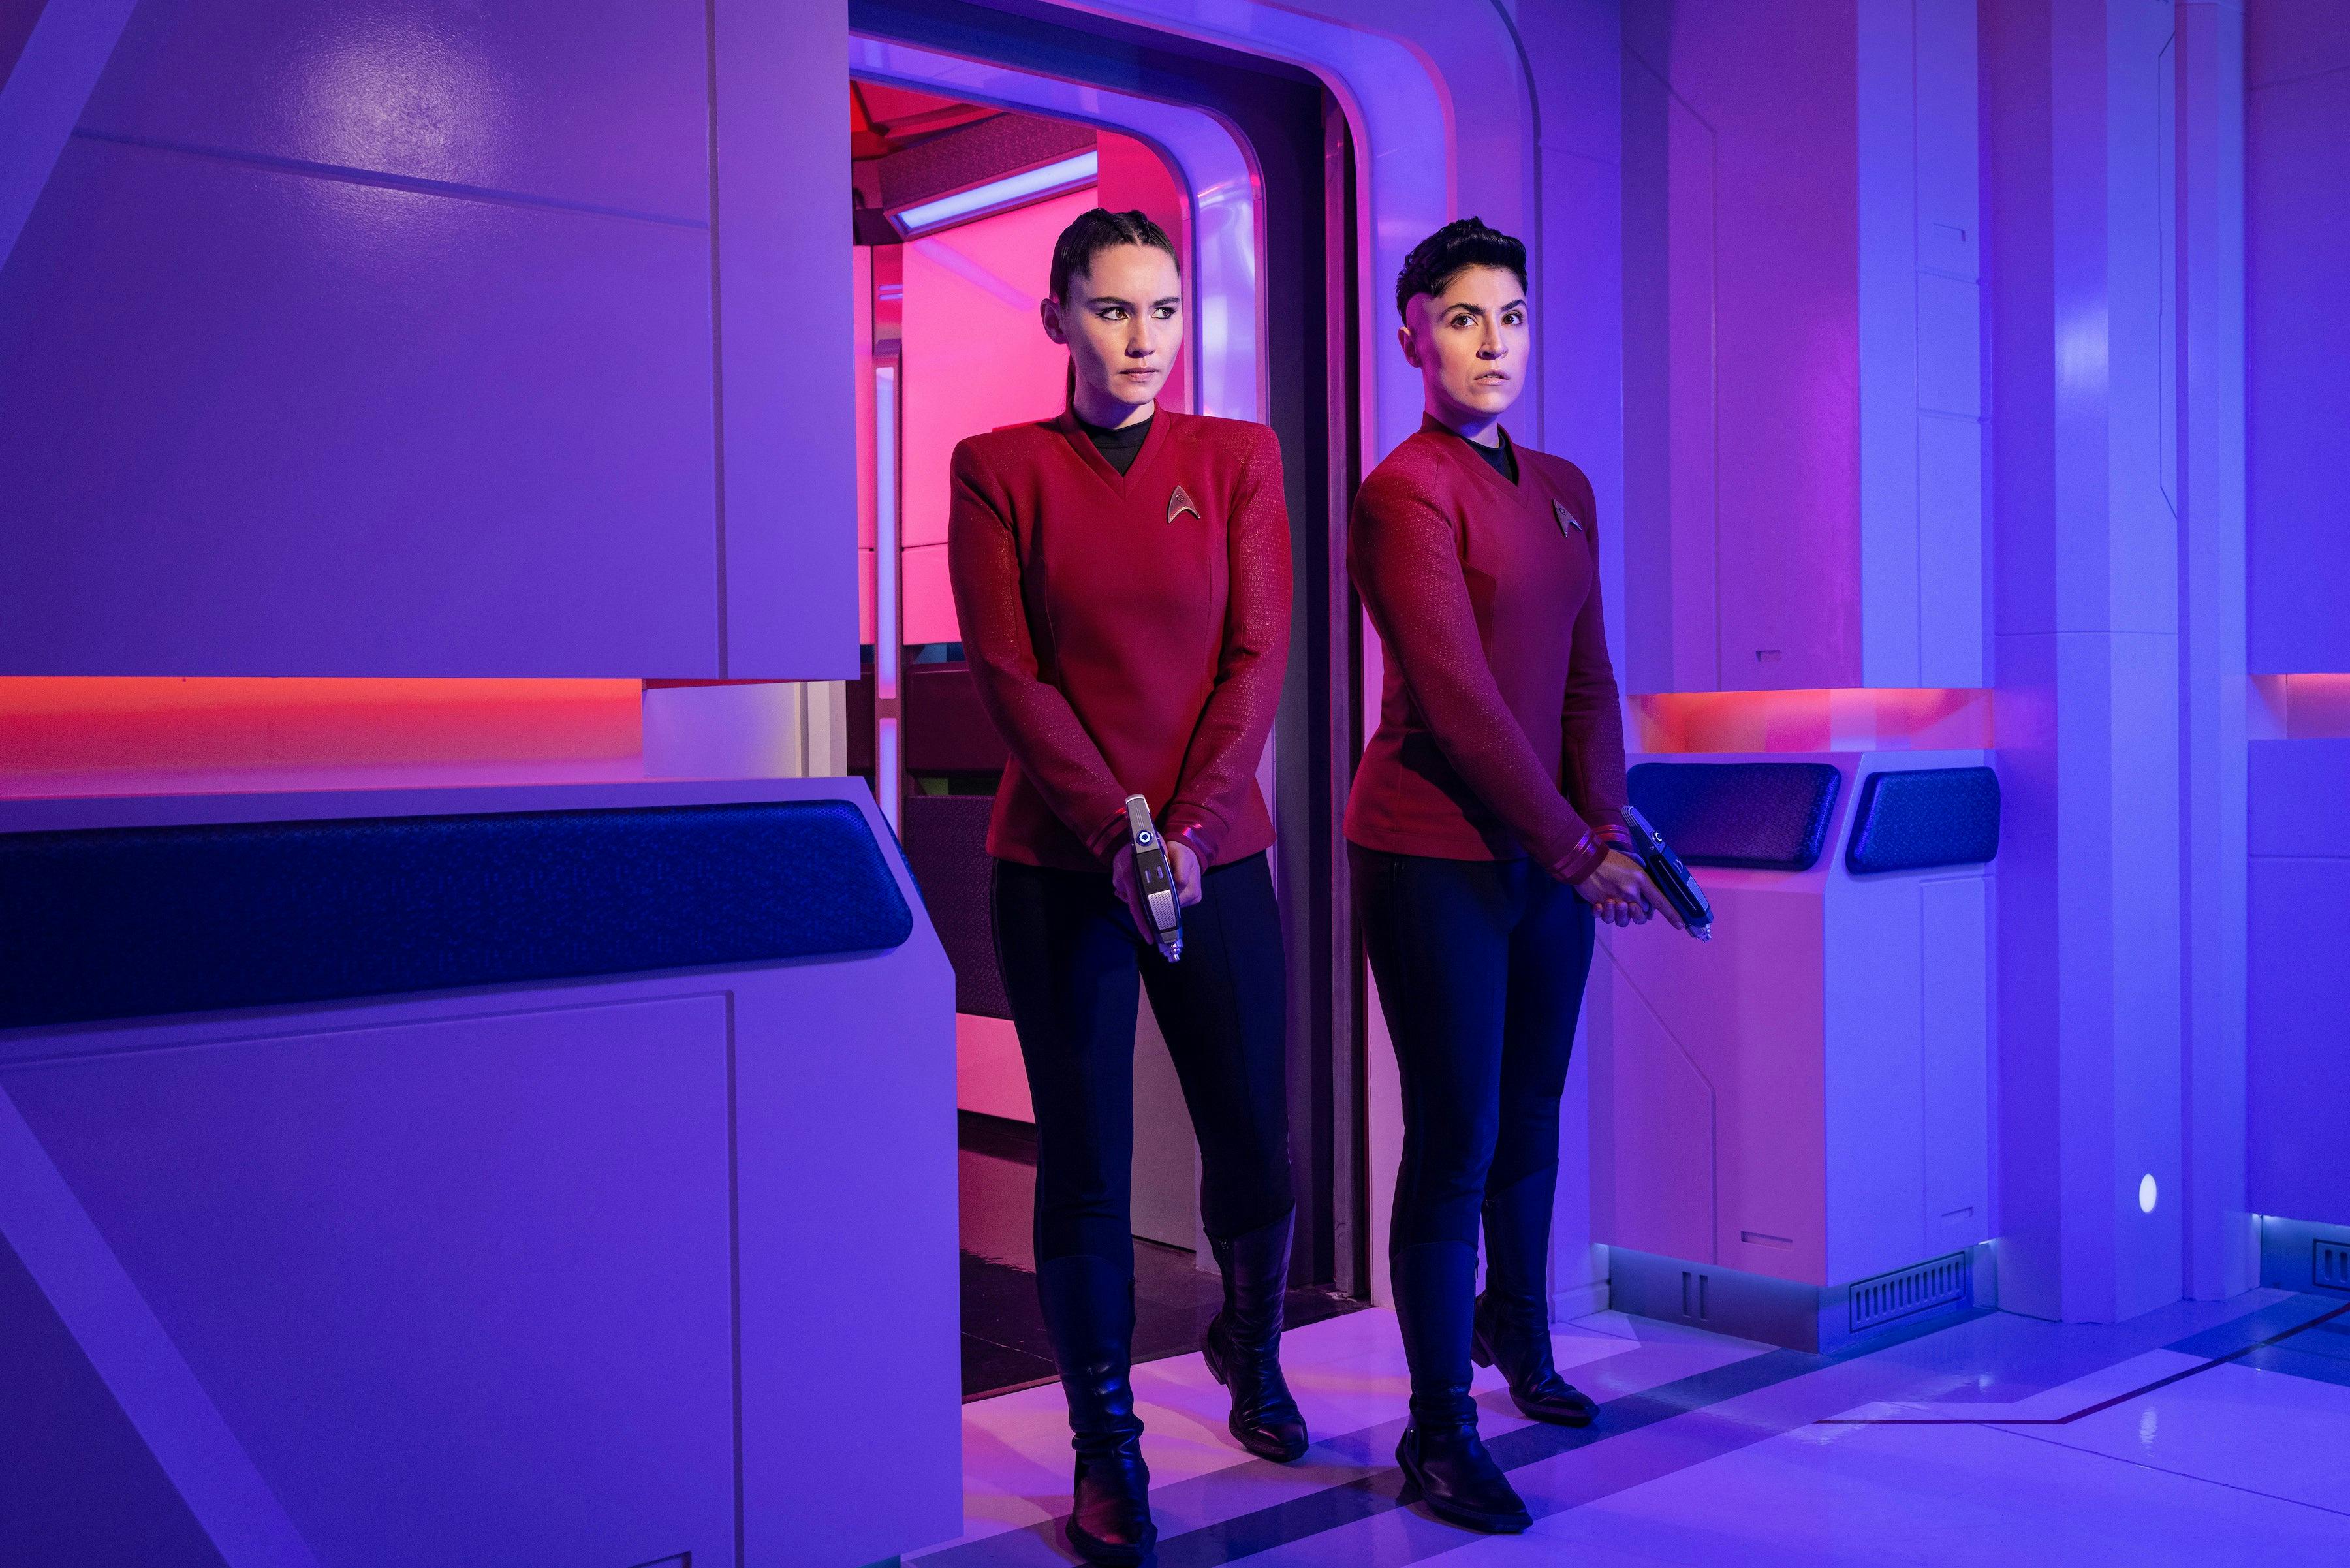 Christina Chong as La'An and Melissa Navia as Erica Ortegas in Star Trek: Strange New Worlds Season 2 promotional images